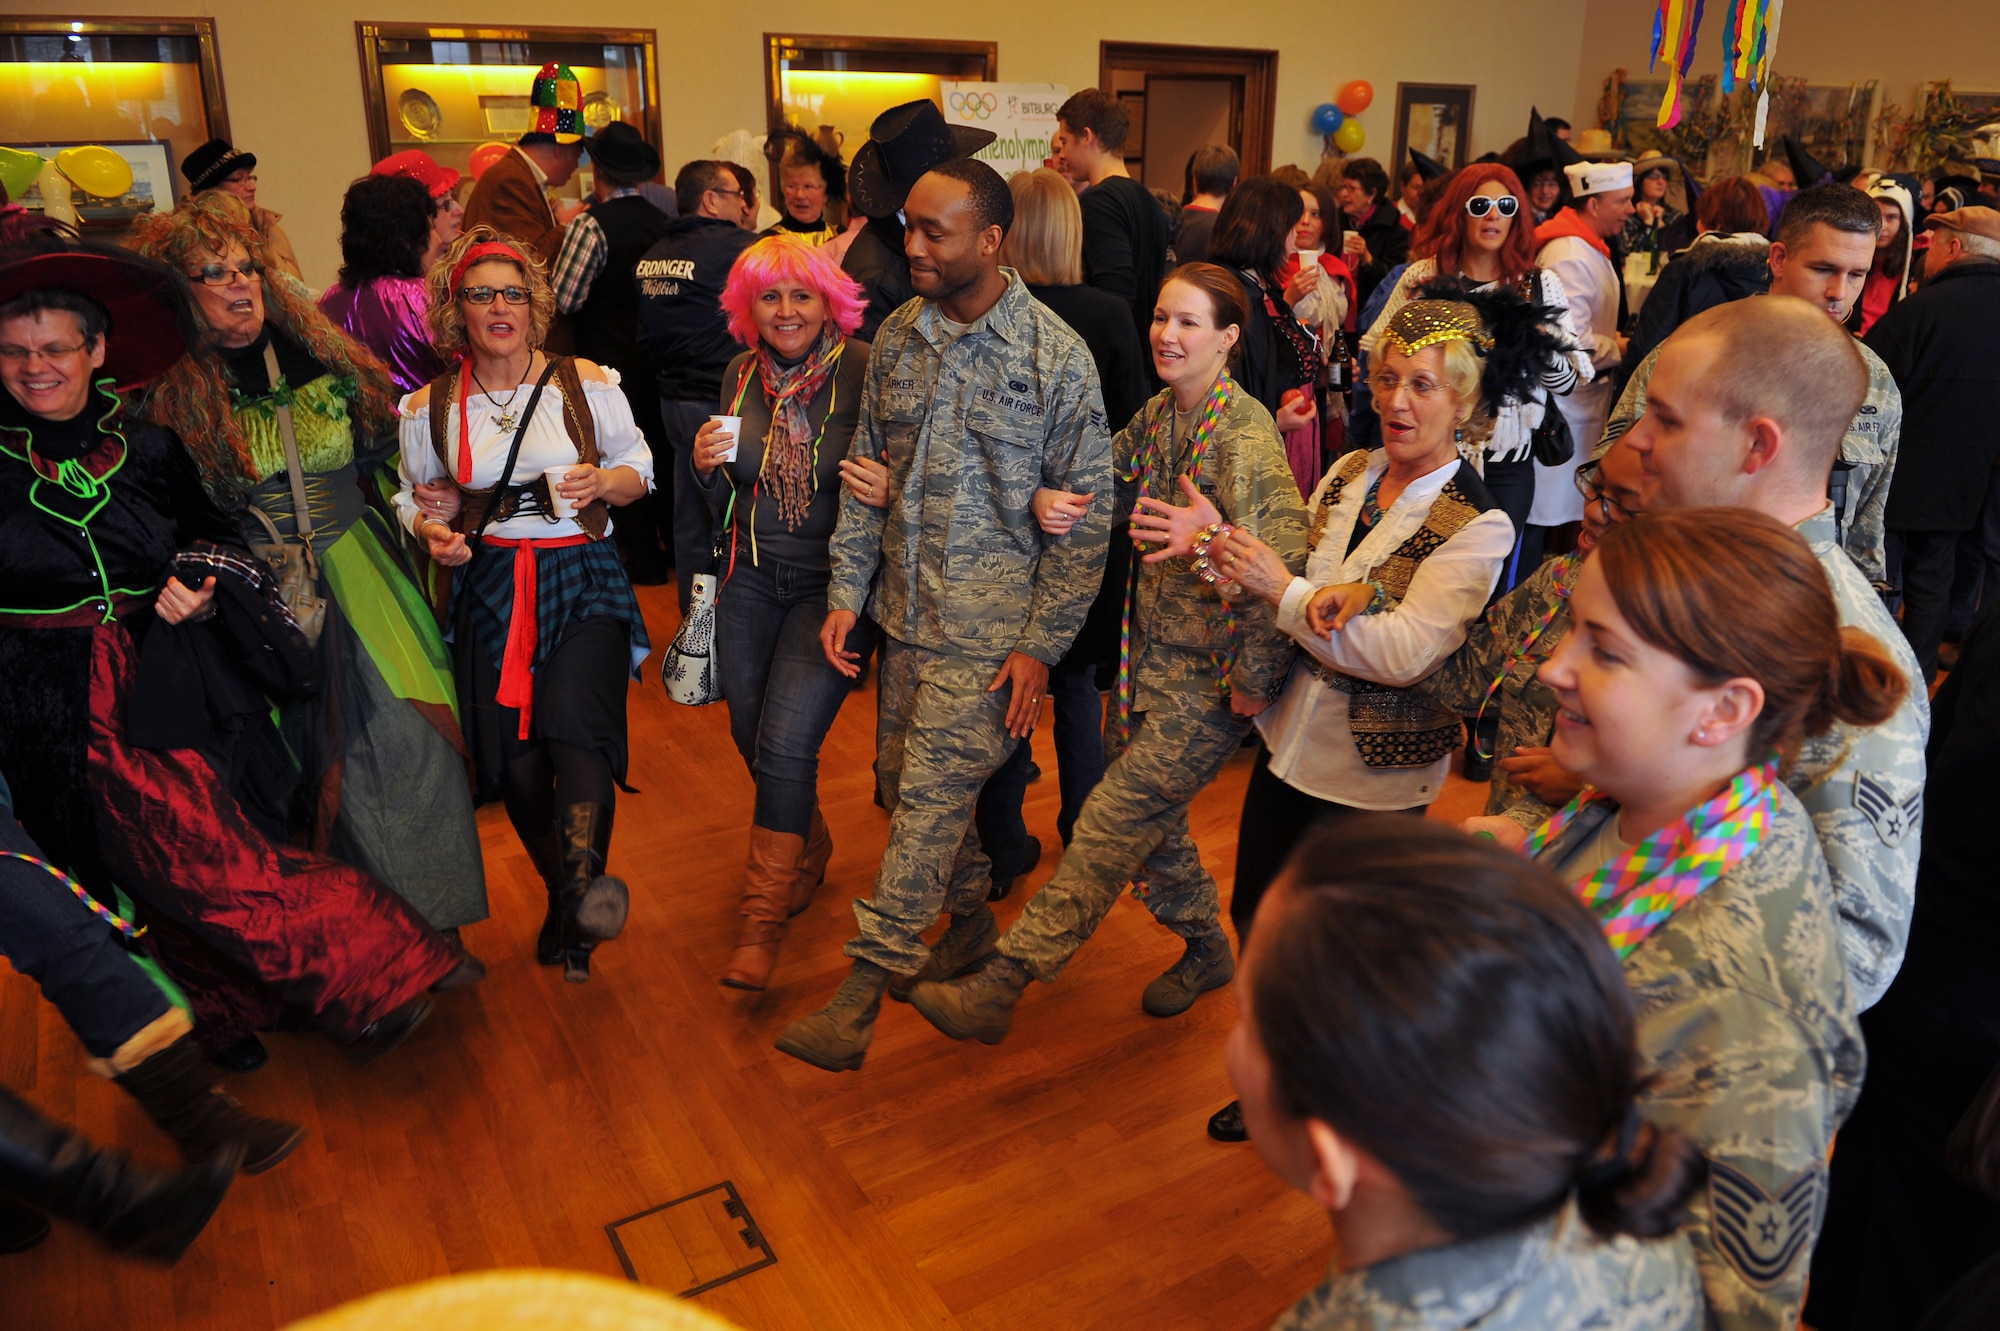 BITBURG, Germany – Local German nationals and Spangdahlem Air Base Airmen dance together during Ladies Fasching Day celebrations at the Bitburg Town Hall here Feb. 16. Ladies Fasching Day is a German celebration where women “take over” the city for the day. Once the ladies have “taken over” the city hall, the celebrations begin with dancing and parading throughout the city. The traditional Fasching celebrations begin the Thursday prior to Lent at the 11th minute past the 11th hour, continue until Ash Wednesday and allow people to indulge before the Lent season. (U.S. Air Force photo by Airman 1st Class Dillon Davis/Released)